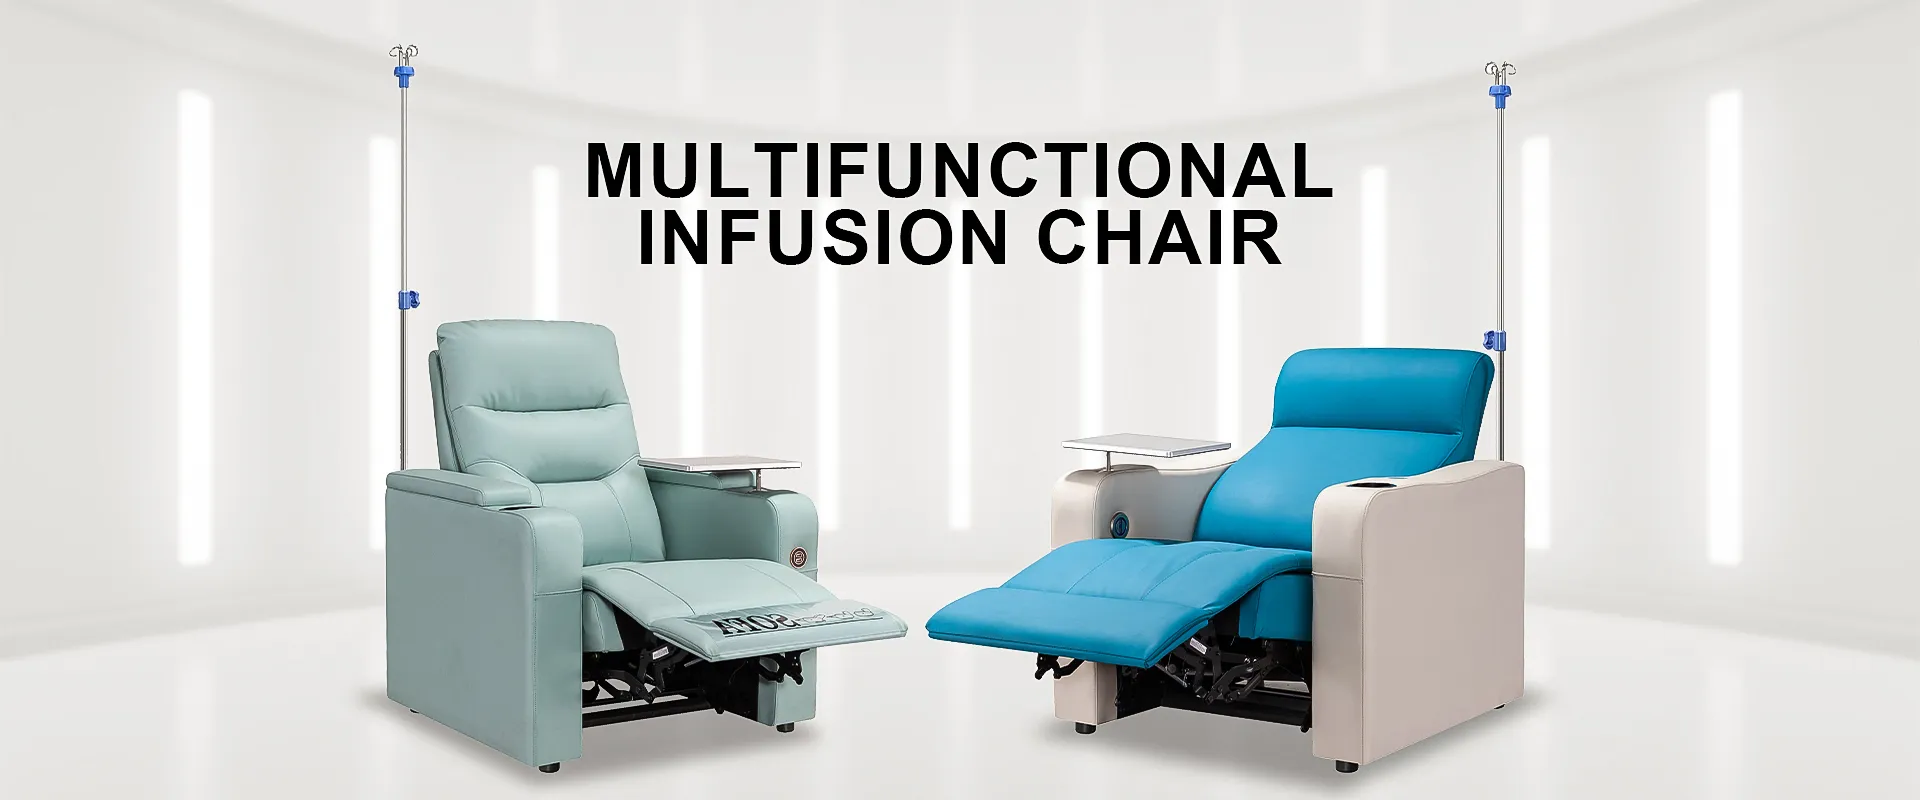 Multifunctional Infusion Chair Suppliers